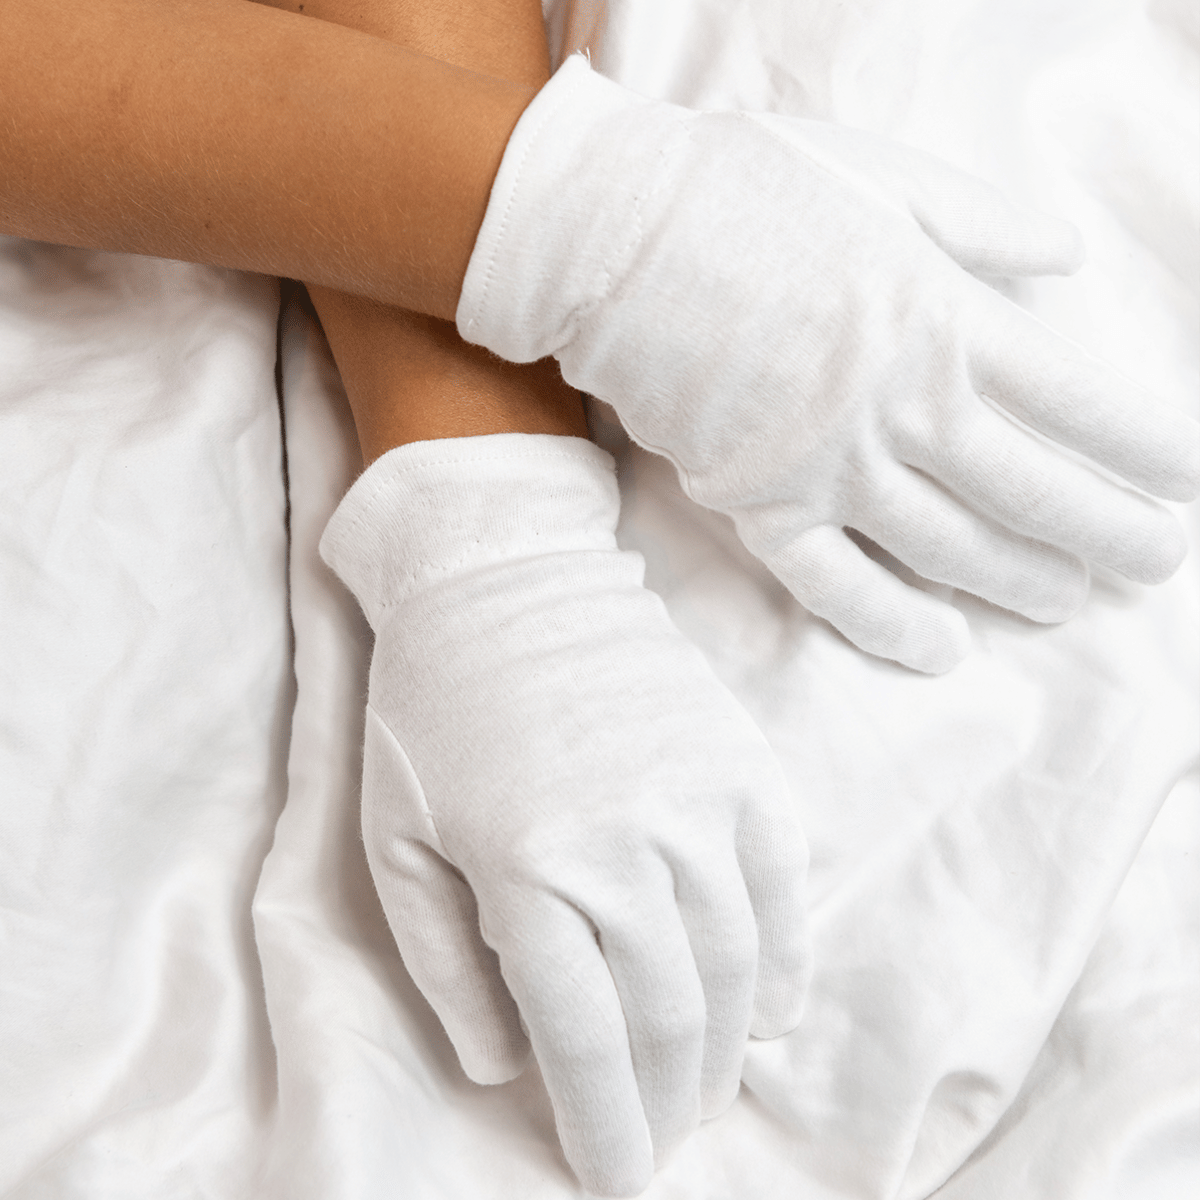 Finding Your Perfect Fit: How to Use Moisturizing Gloves